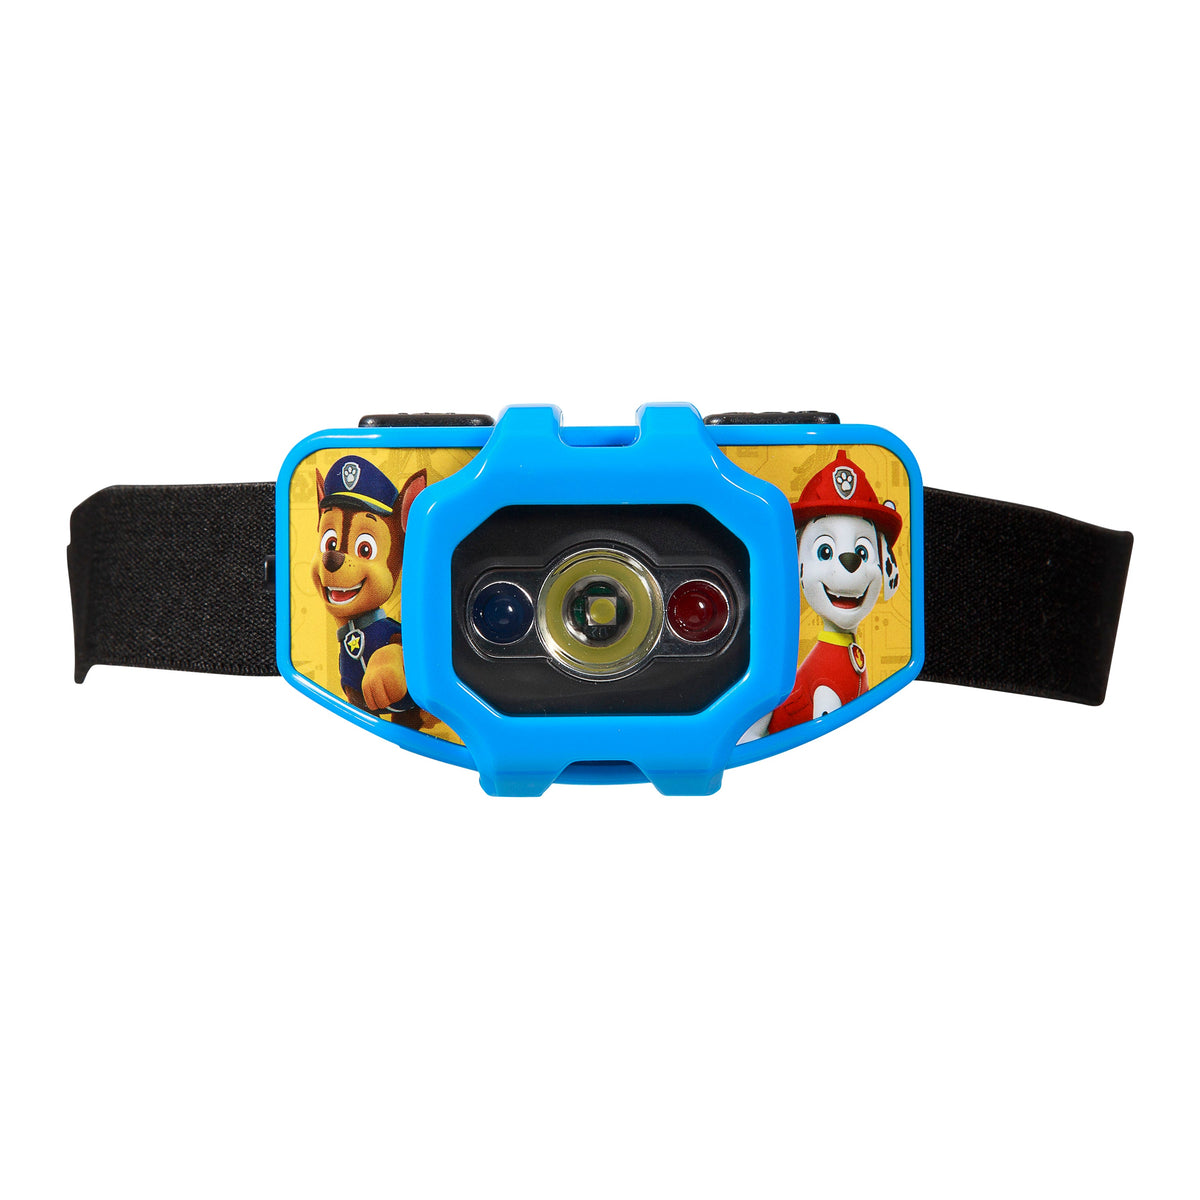 [OPEN BOX] KIDdesigns Paw Patrol Kids Headlamp with 3 Light Modes and Built-in Sound Effects - Multi-color